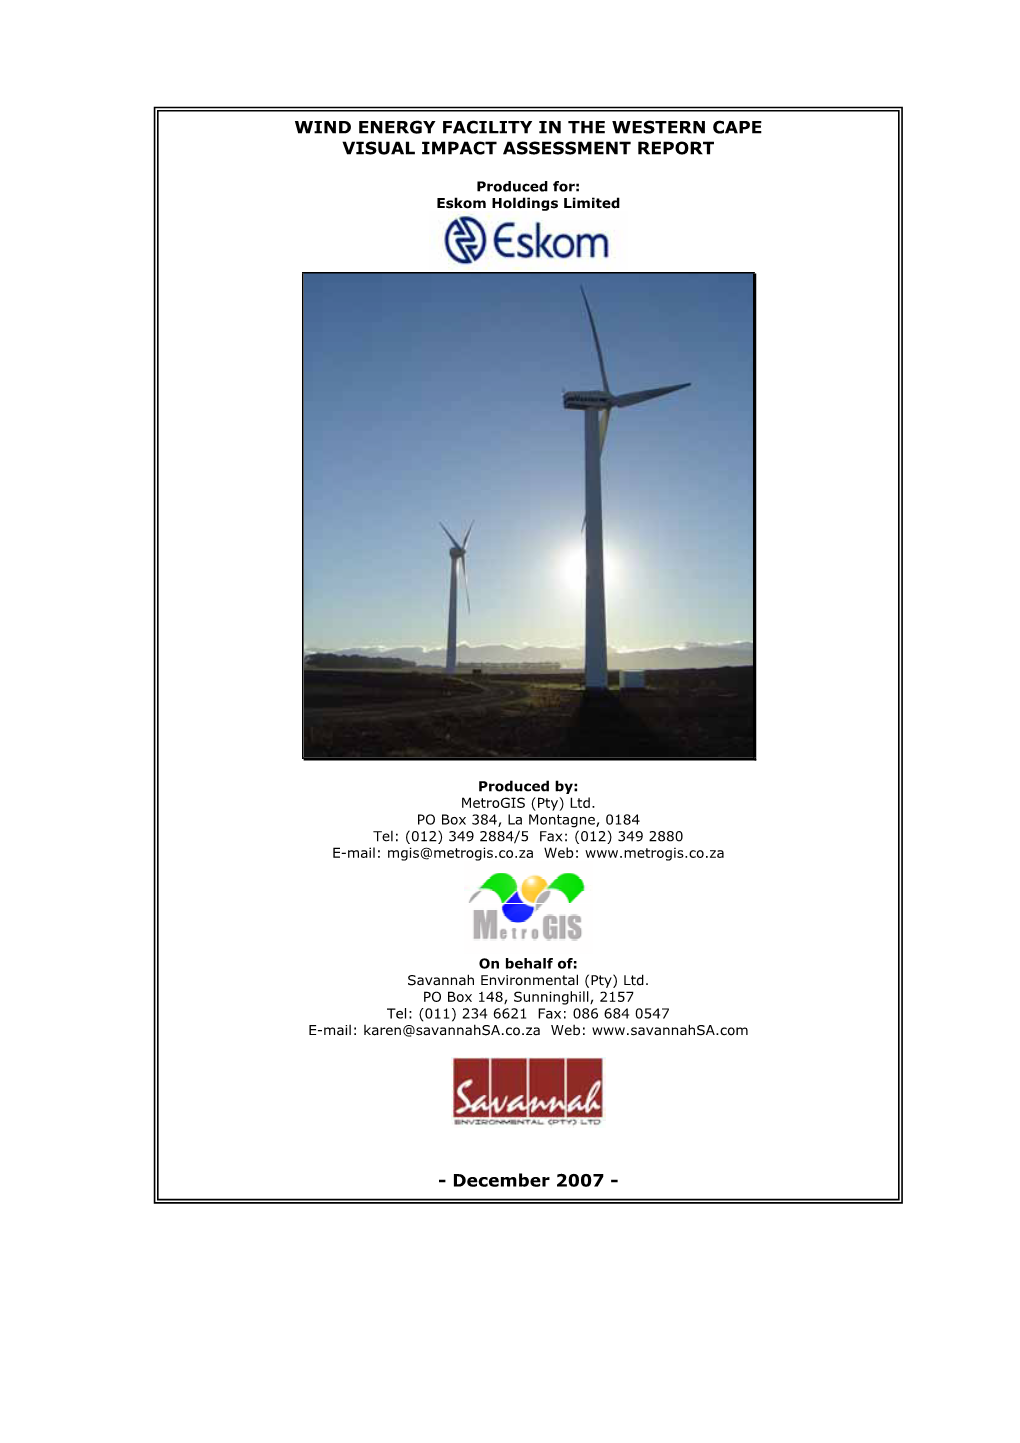 Wind Energy Facility in the Western Cape Visual Impact Assessment Report